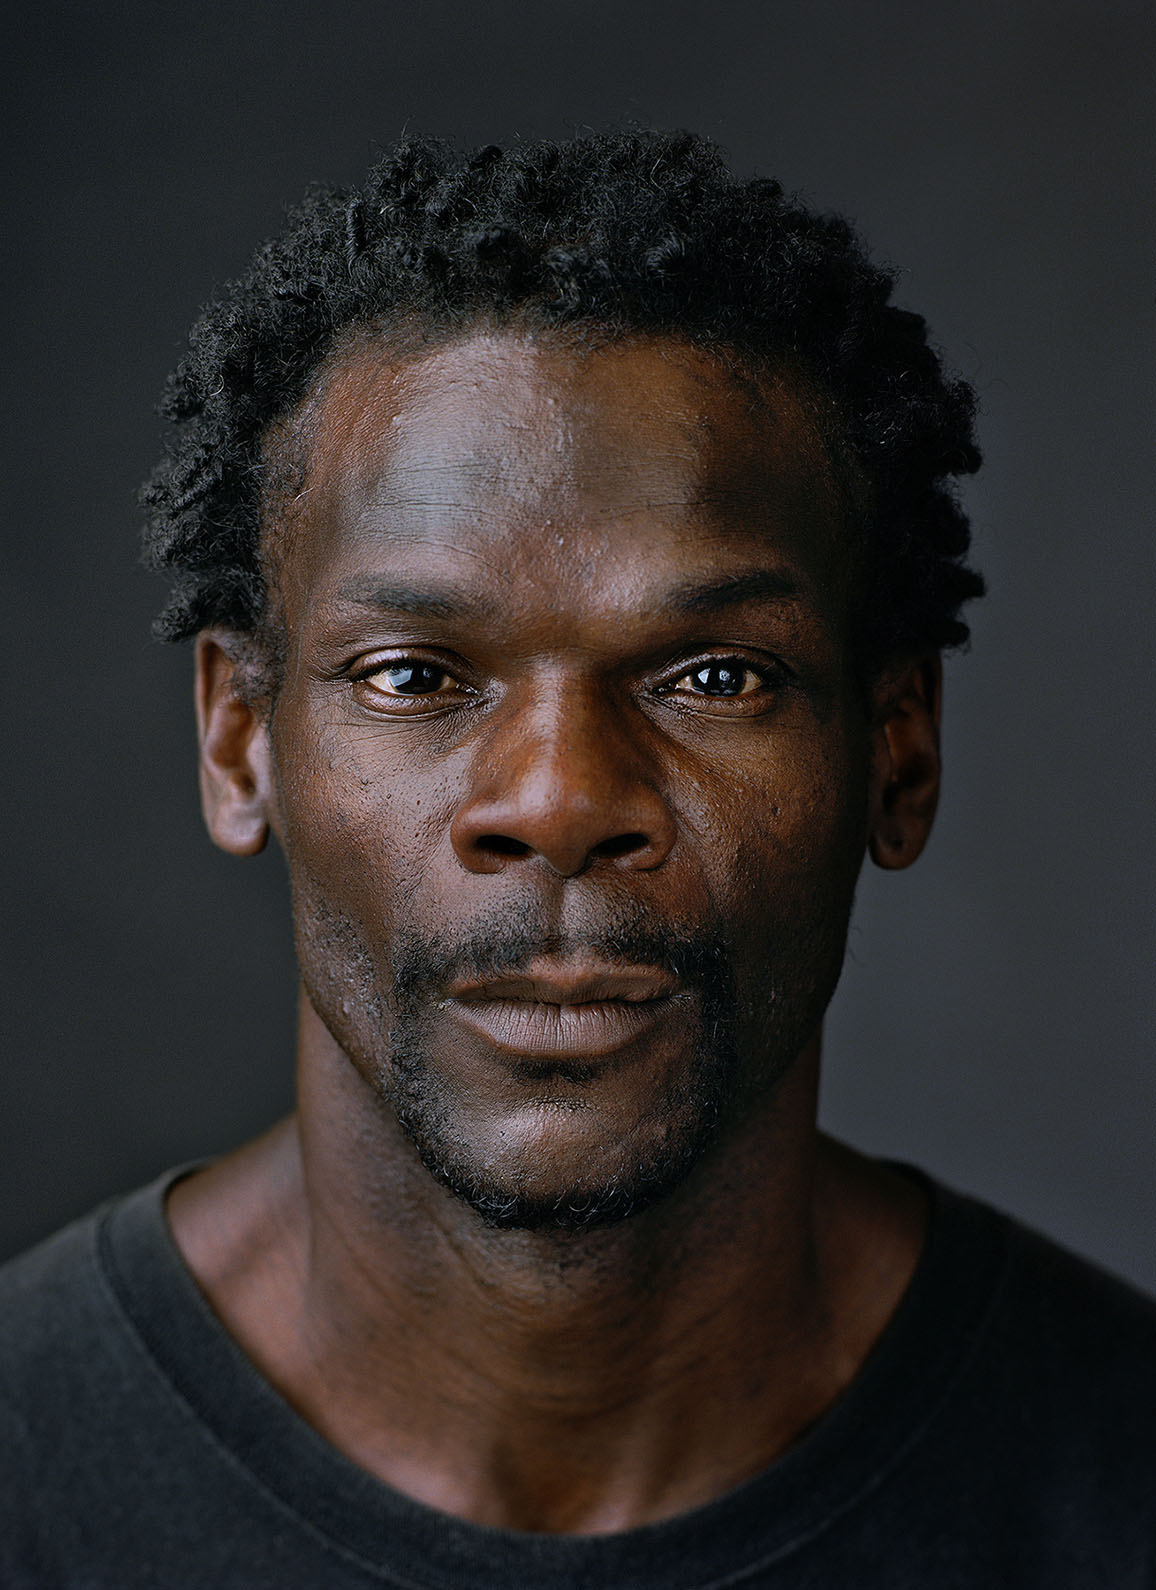 USA. "Down and Out in the South": Studio portraits of homeless people in Atlanta (GA), Columbia (SC) and the Mississippi Delta.  Kevin (b. Baltimore MD, 1968), photographed in Atlanta, GA. June 2011.